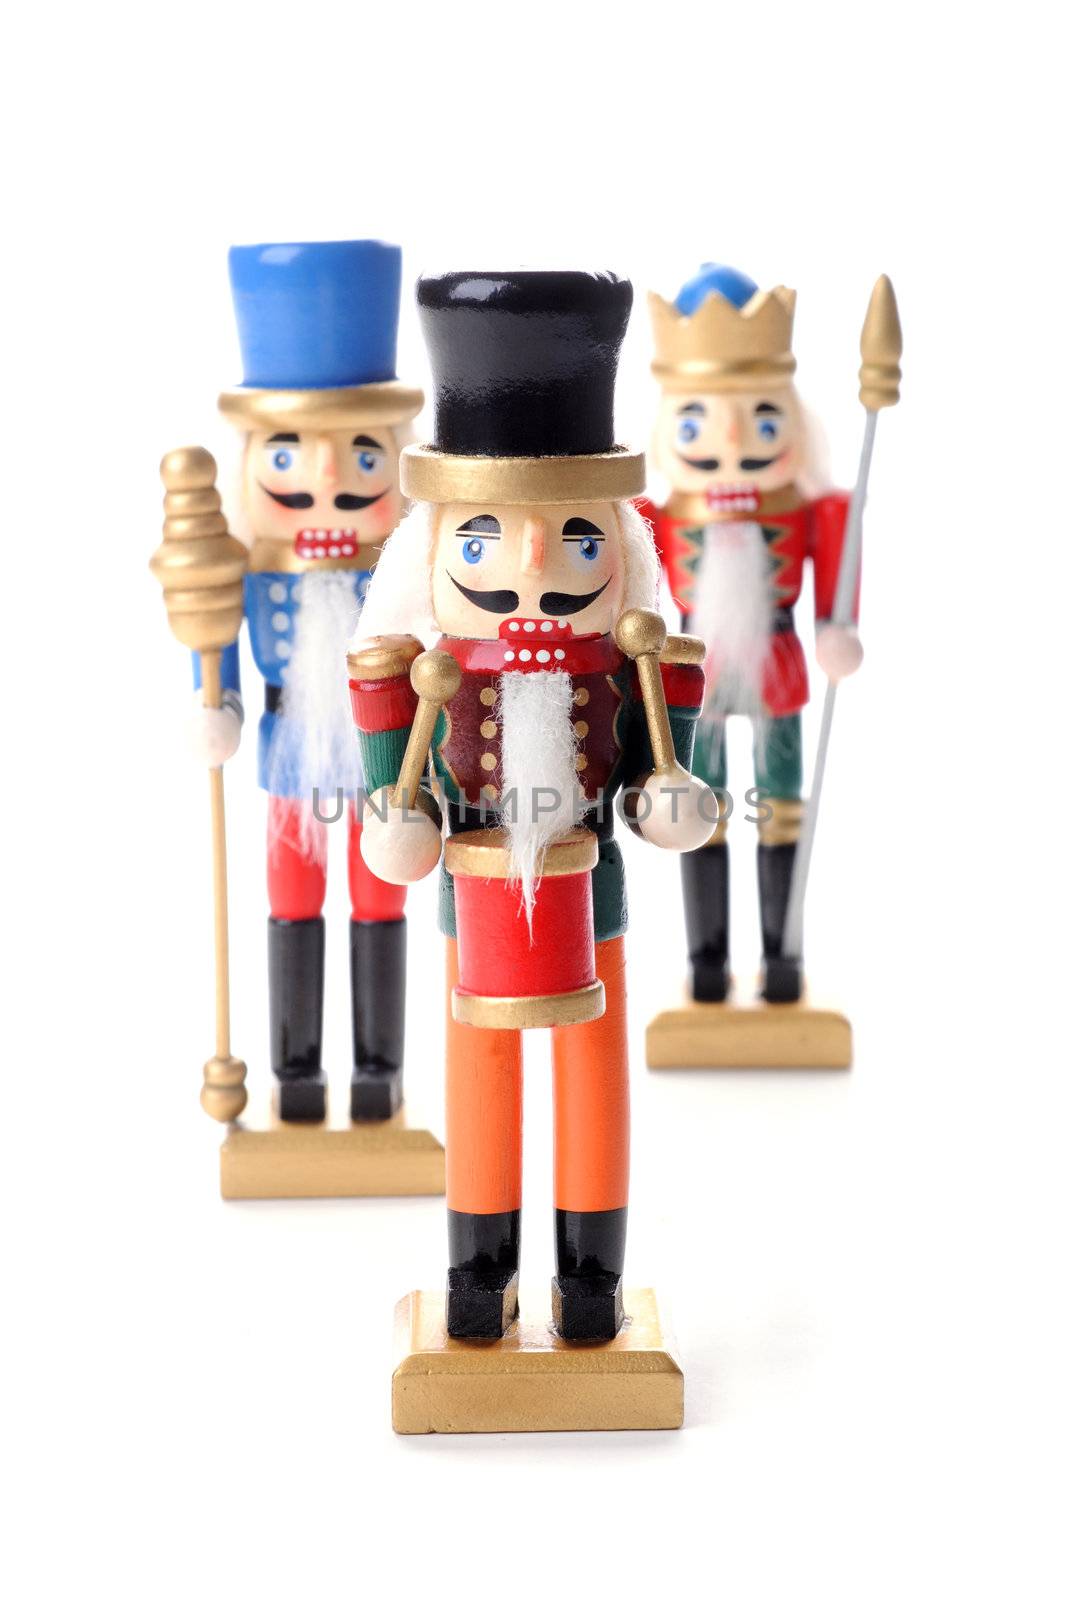 Nutcrackers by billberryphotography